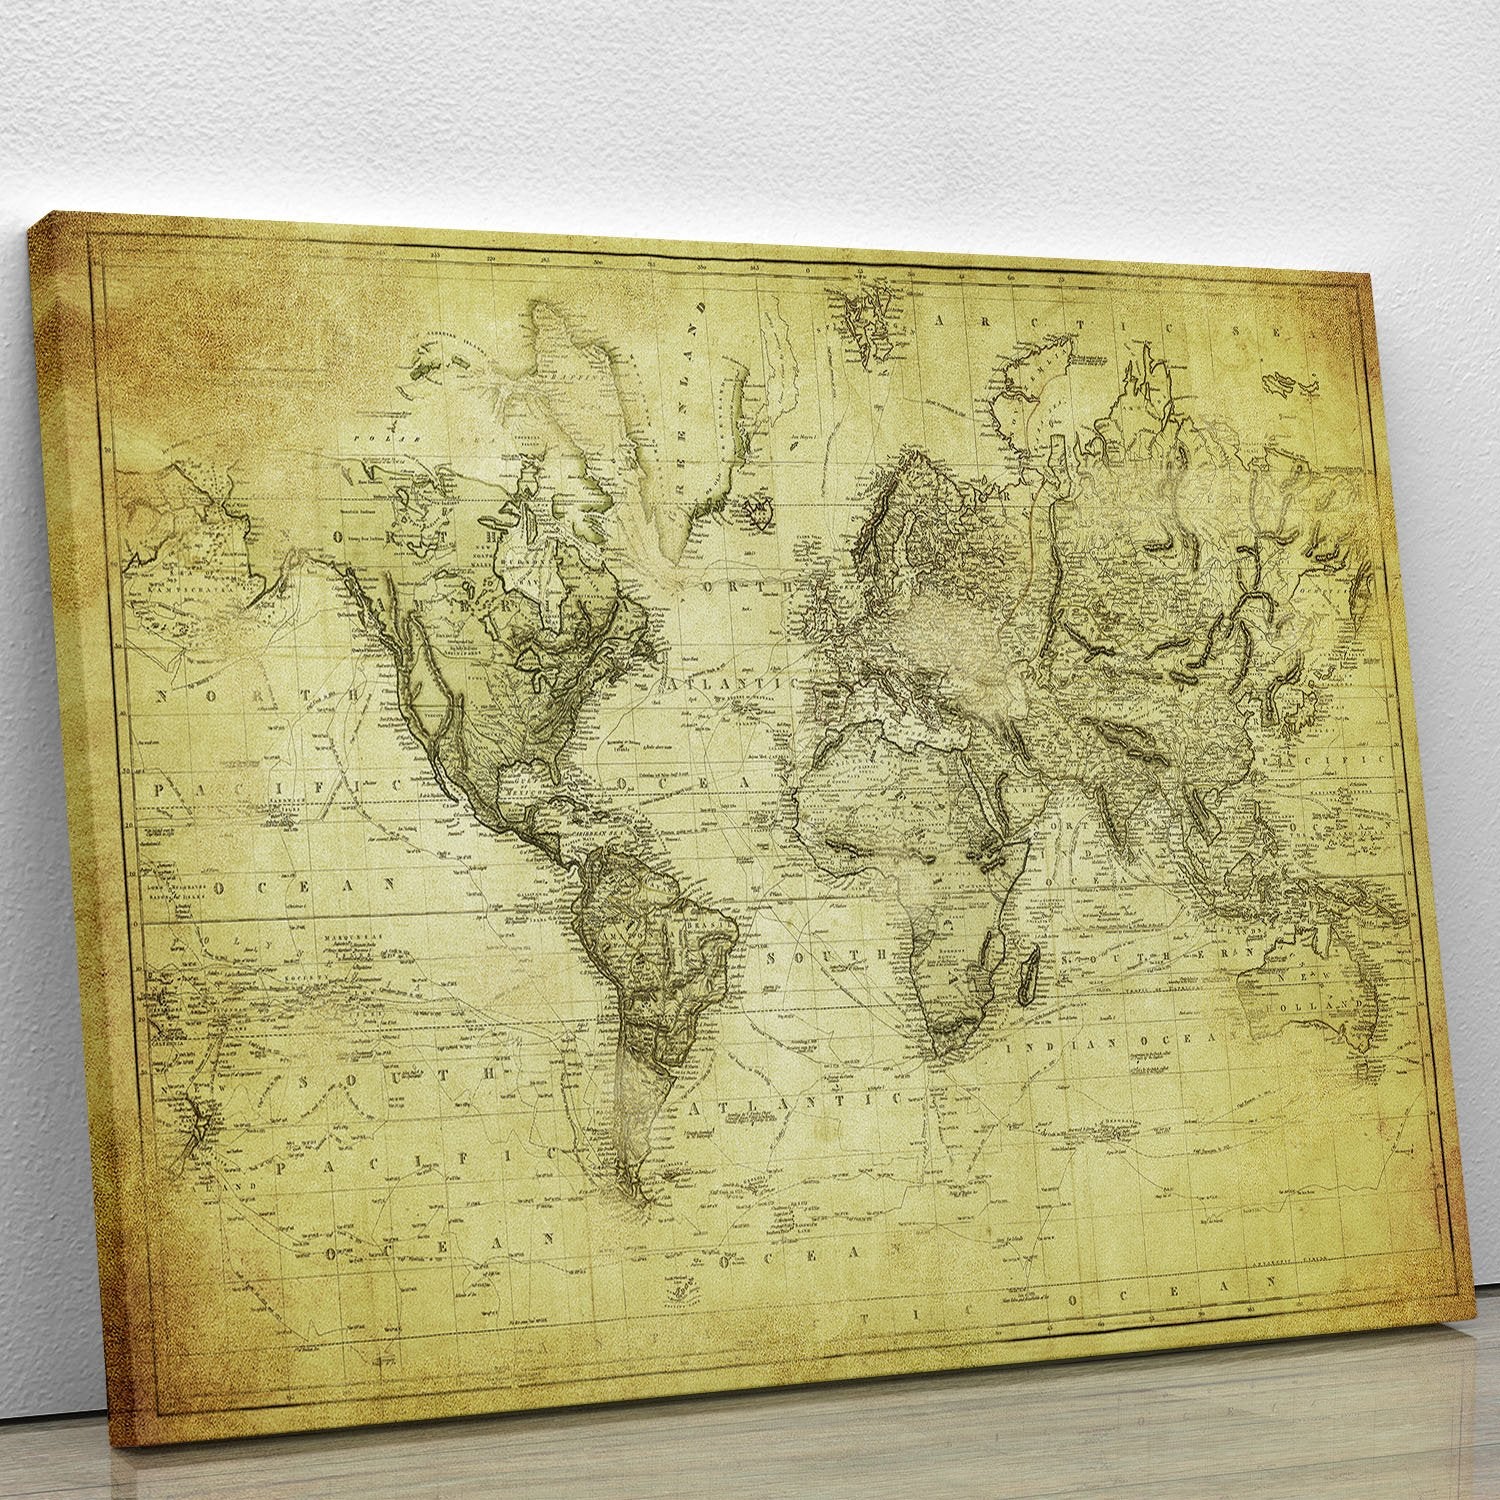 vintage map of the world 1831 Canvas Print or Poster